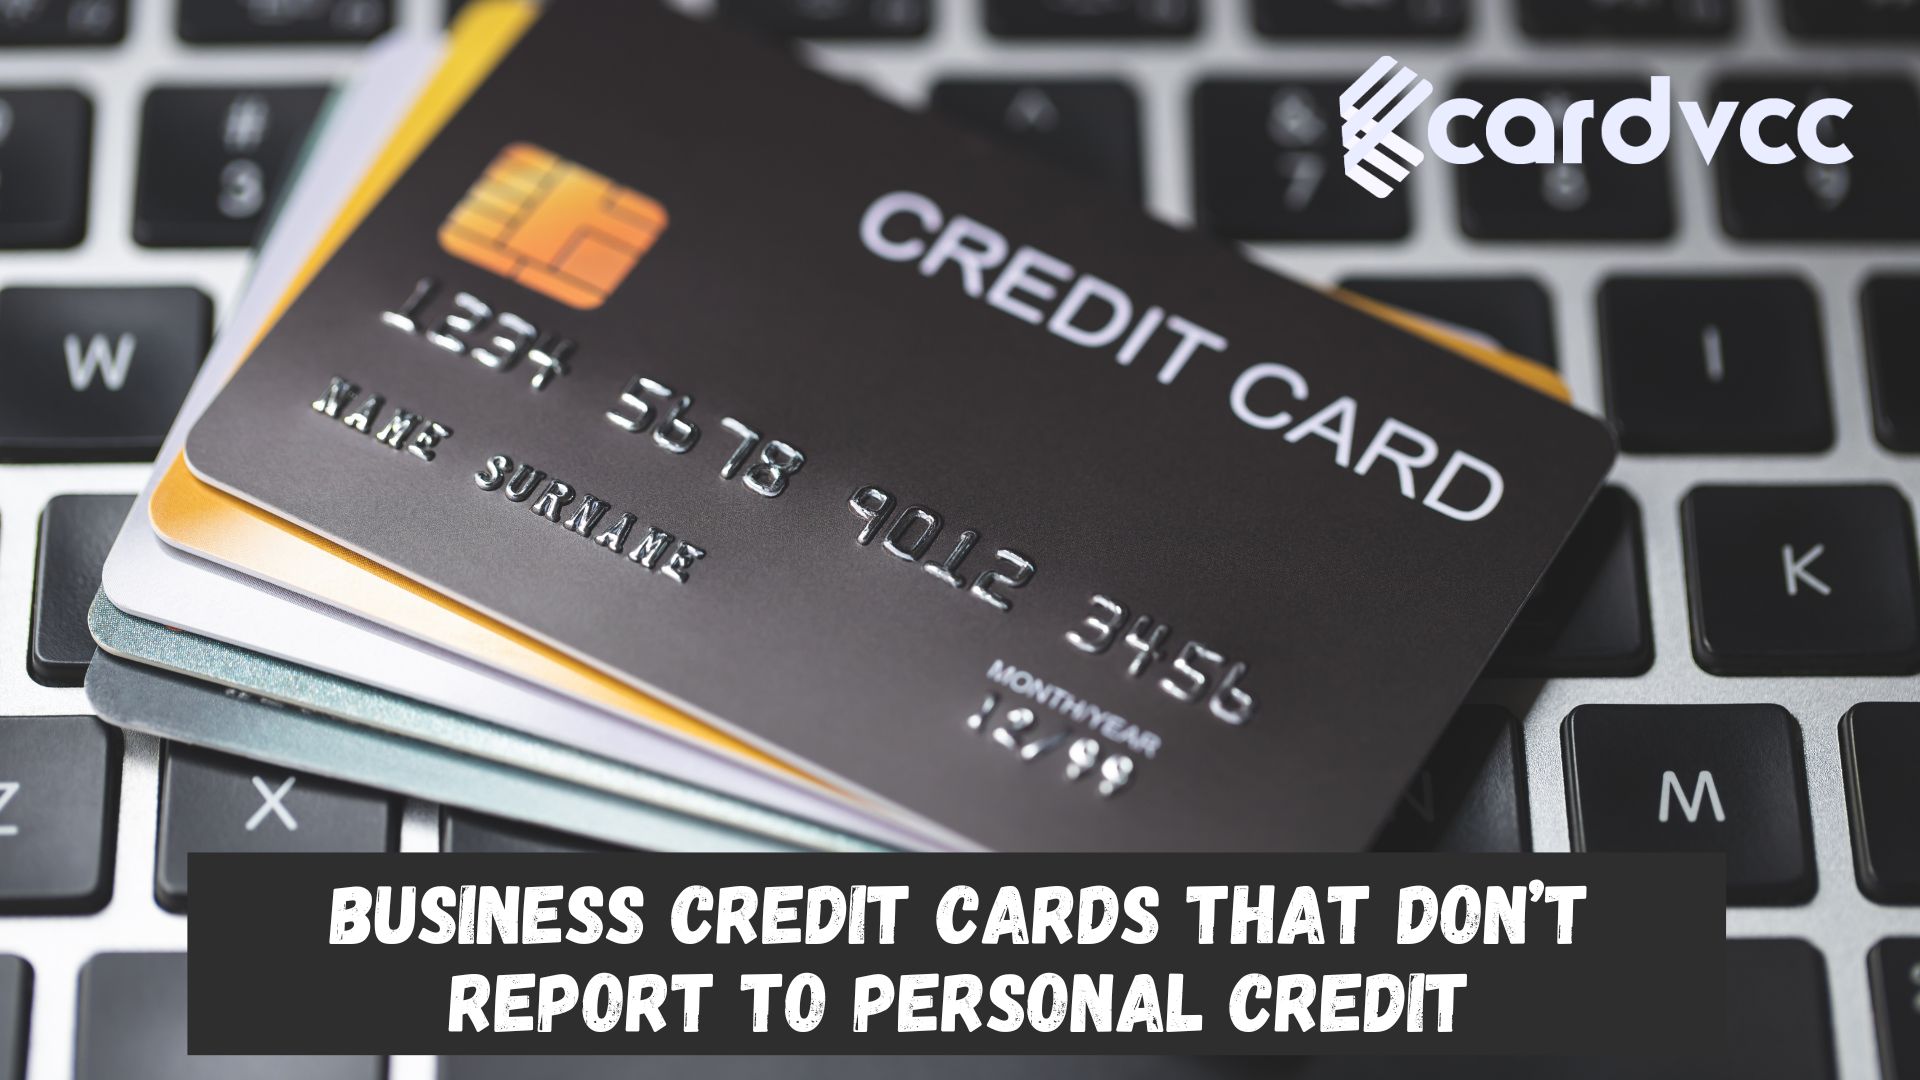 Business Credit Cards That Don’t Report to Personal Credit